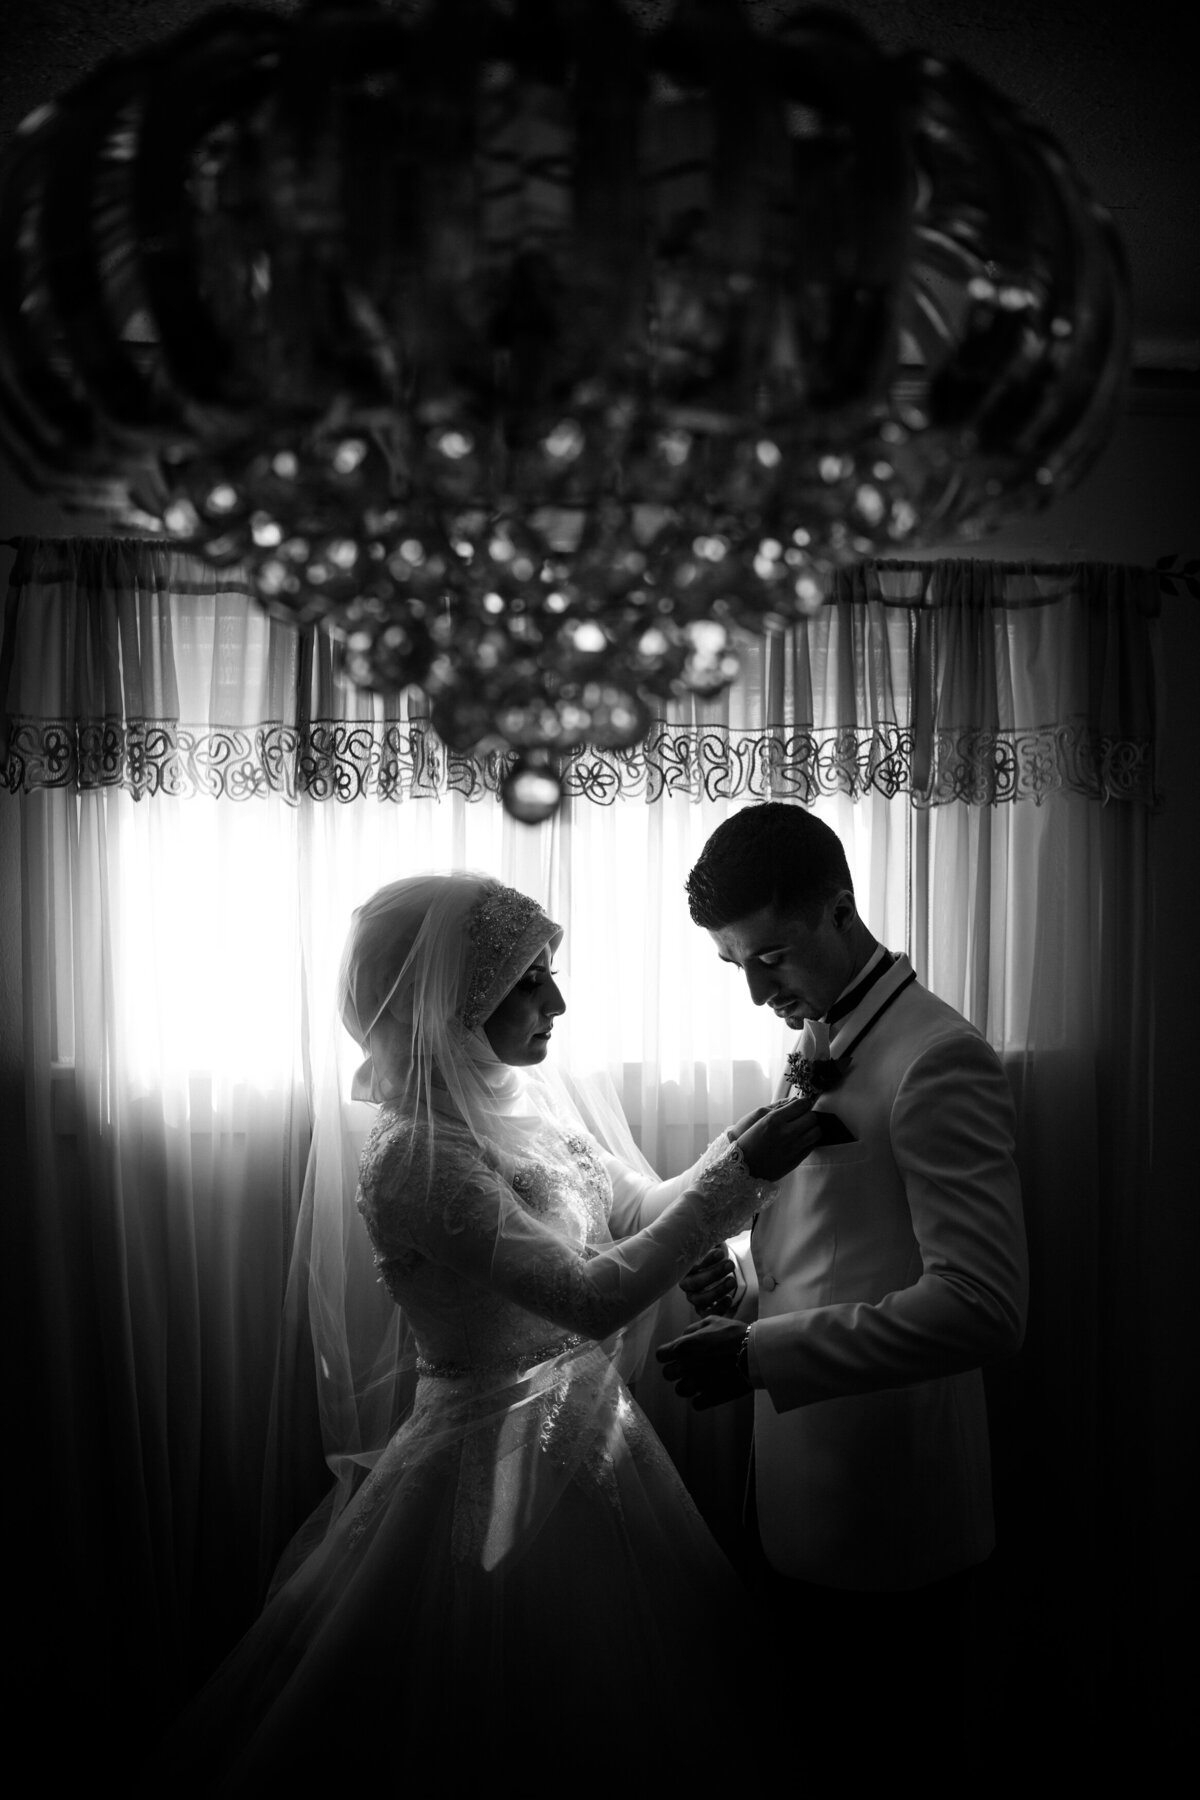 Couple enjoying a quiet moment on their wedding day backlit by a window with a crystal chandelier.